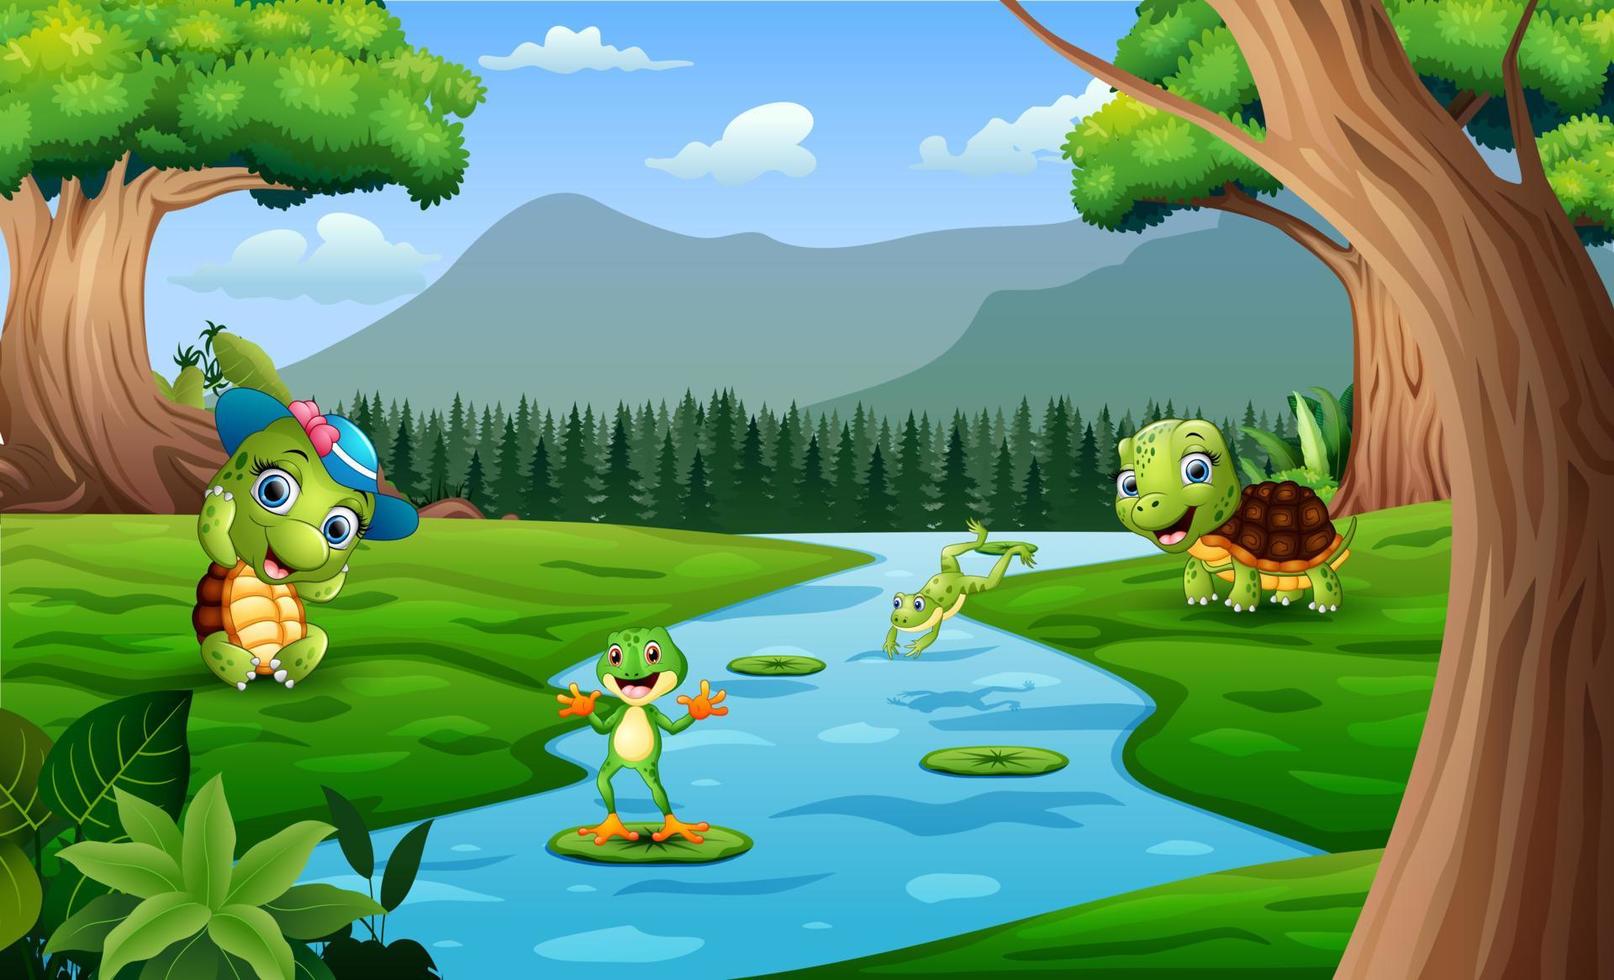 Happy turtles and frogs playing in the river illustration vector